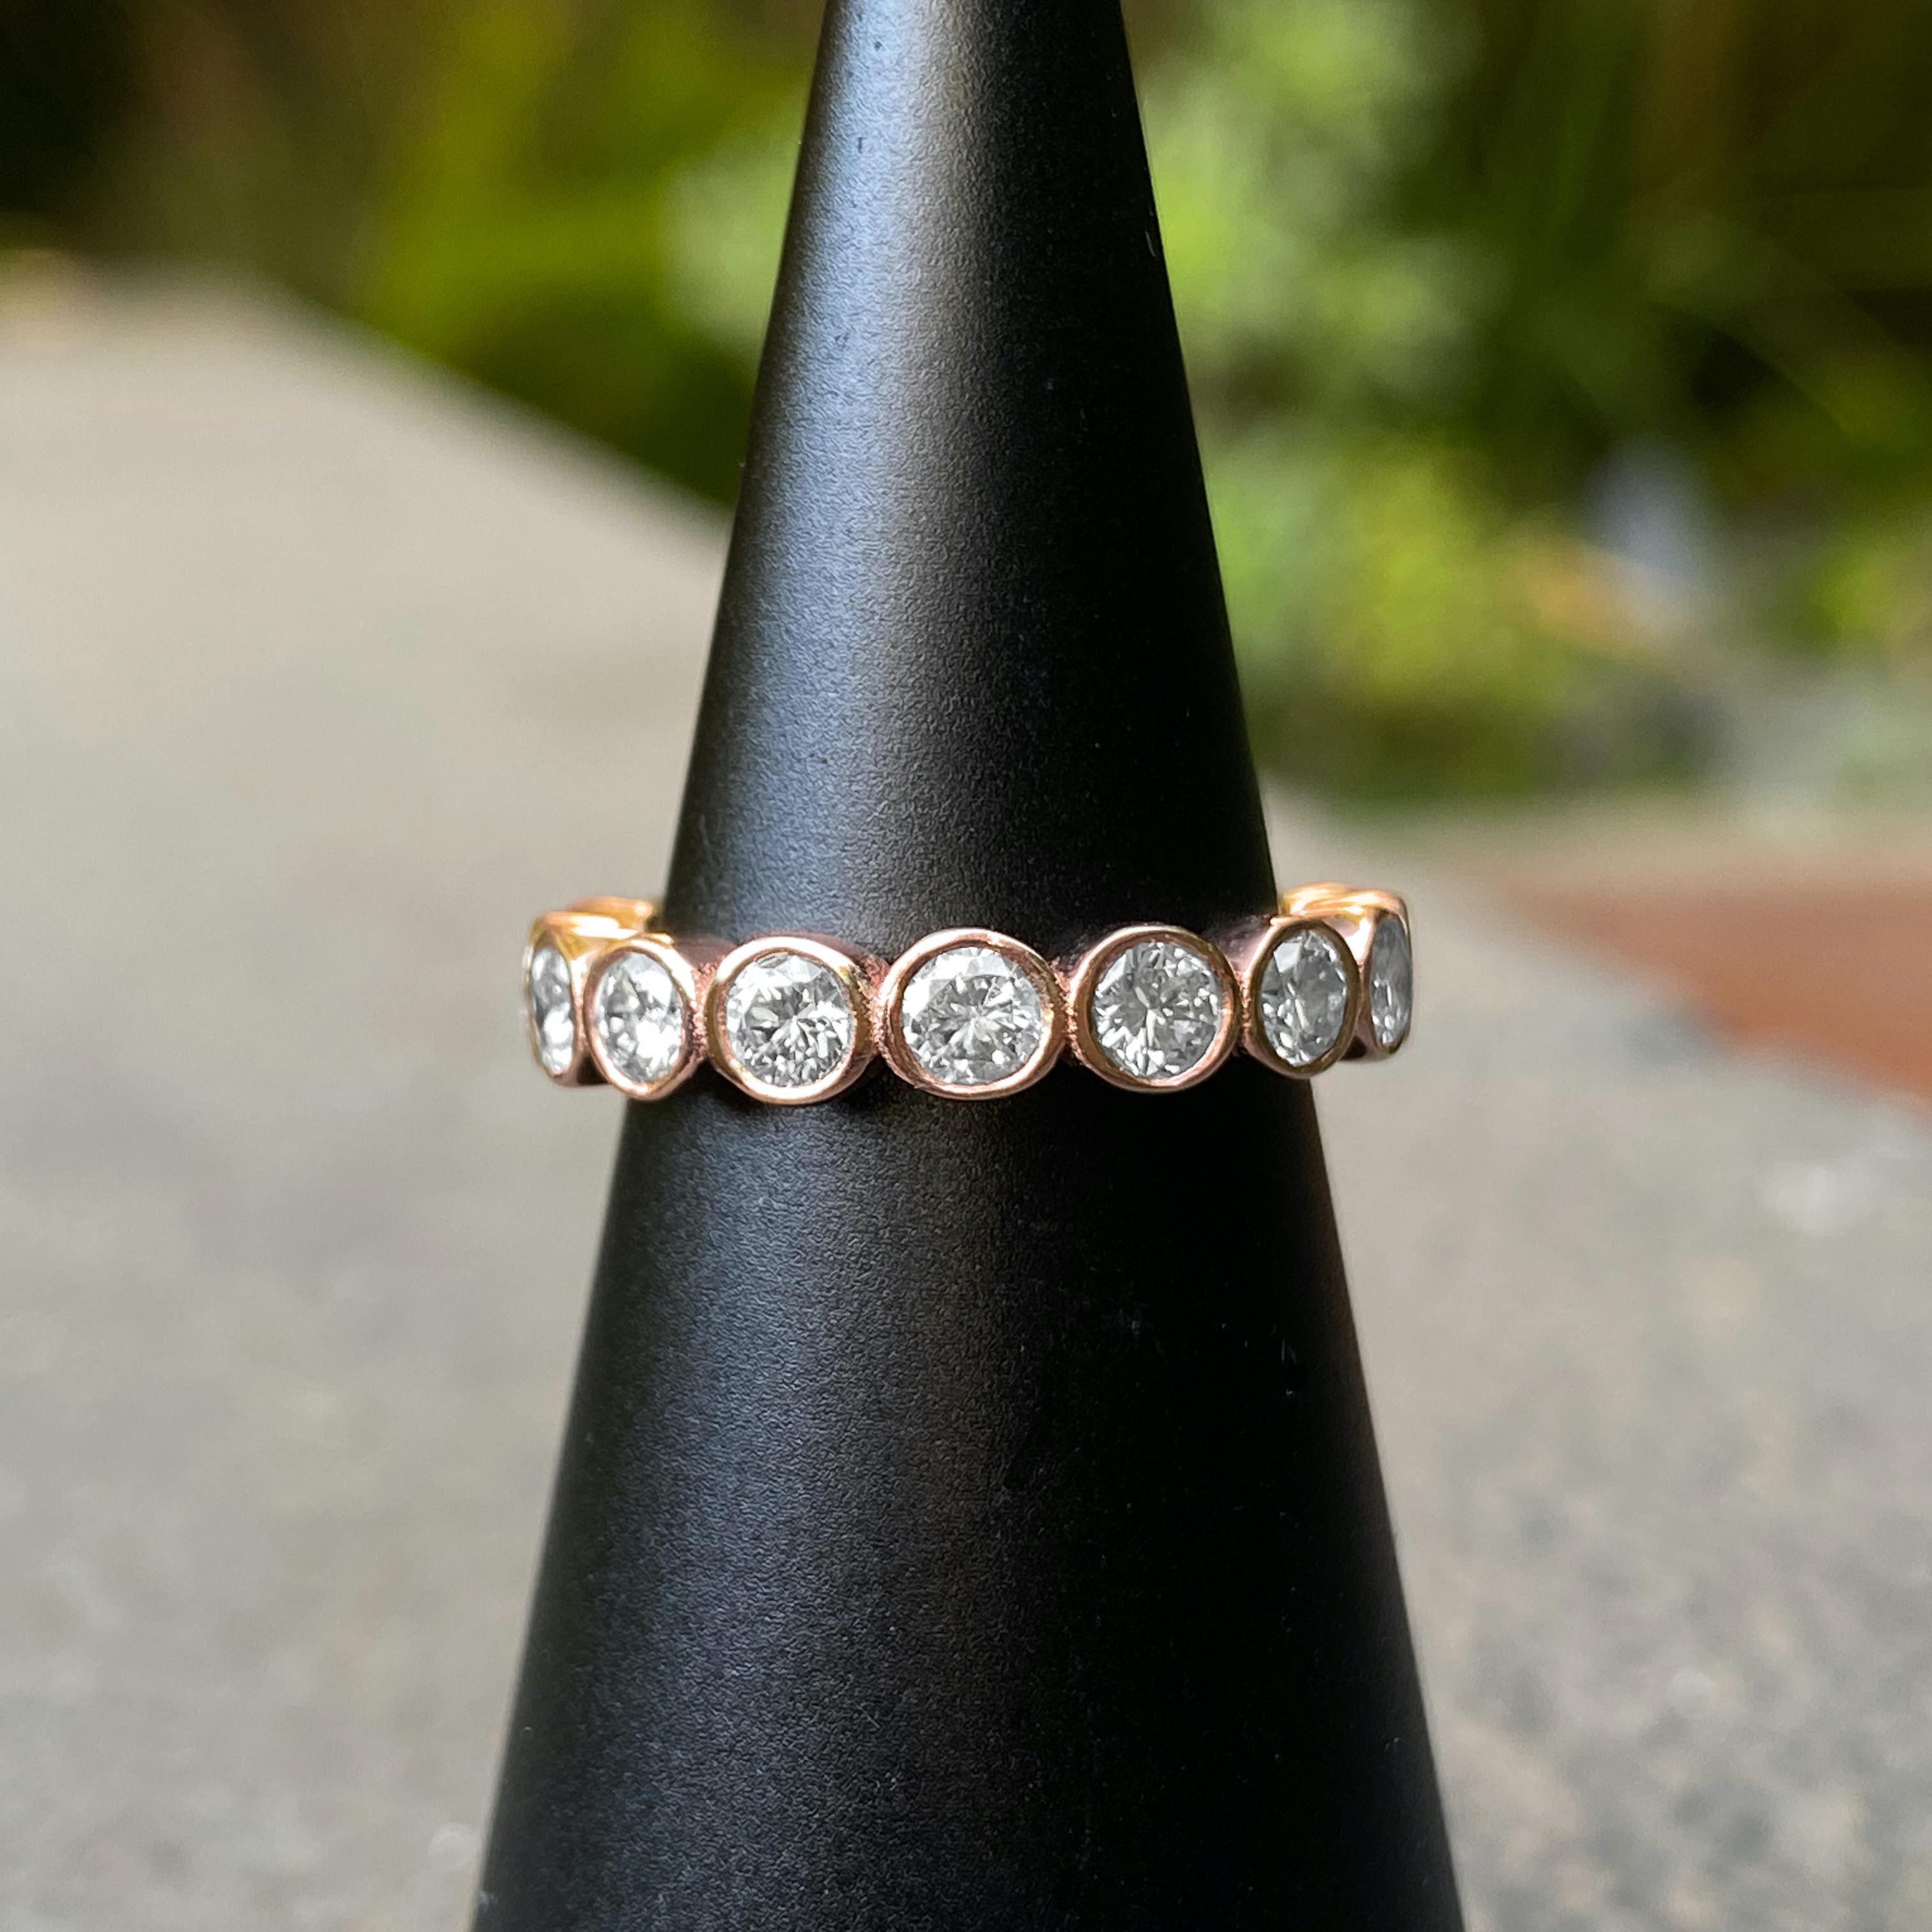 Eytan Brandes designed this prong-free eternity band with 16 generously sized diamonds as a wedding band, but it makes a great stacker, and it's substantial enough to be worn solo as well.  

This ring features H-color, VS2 clarity full-cut,